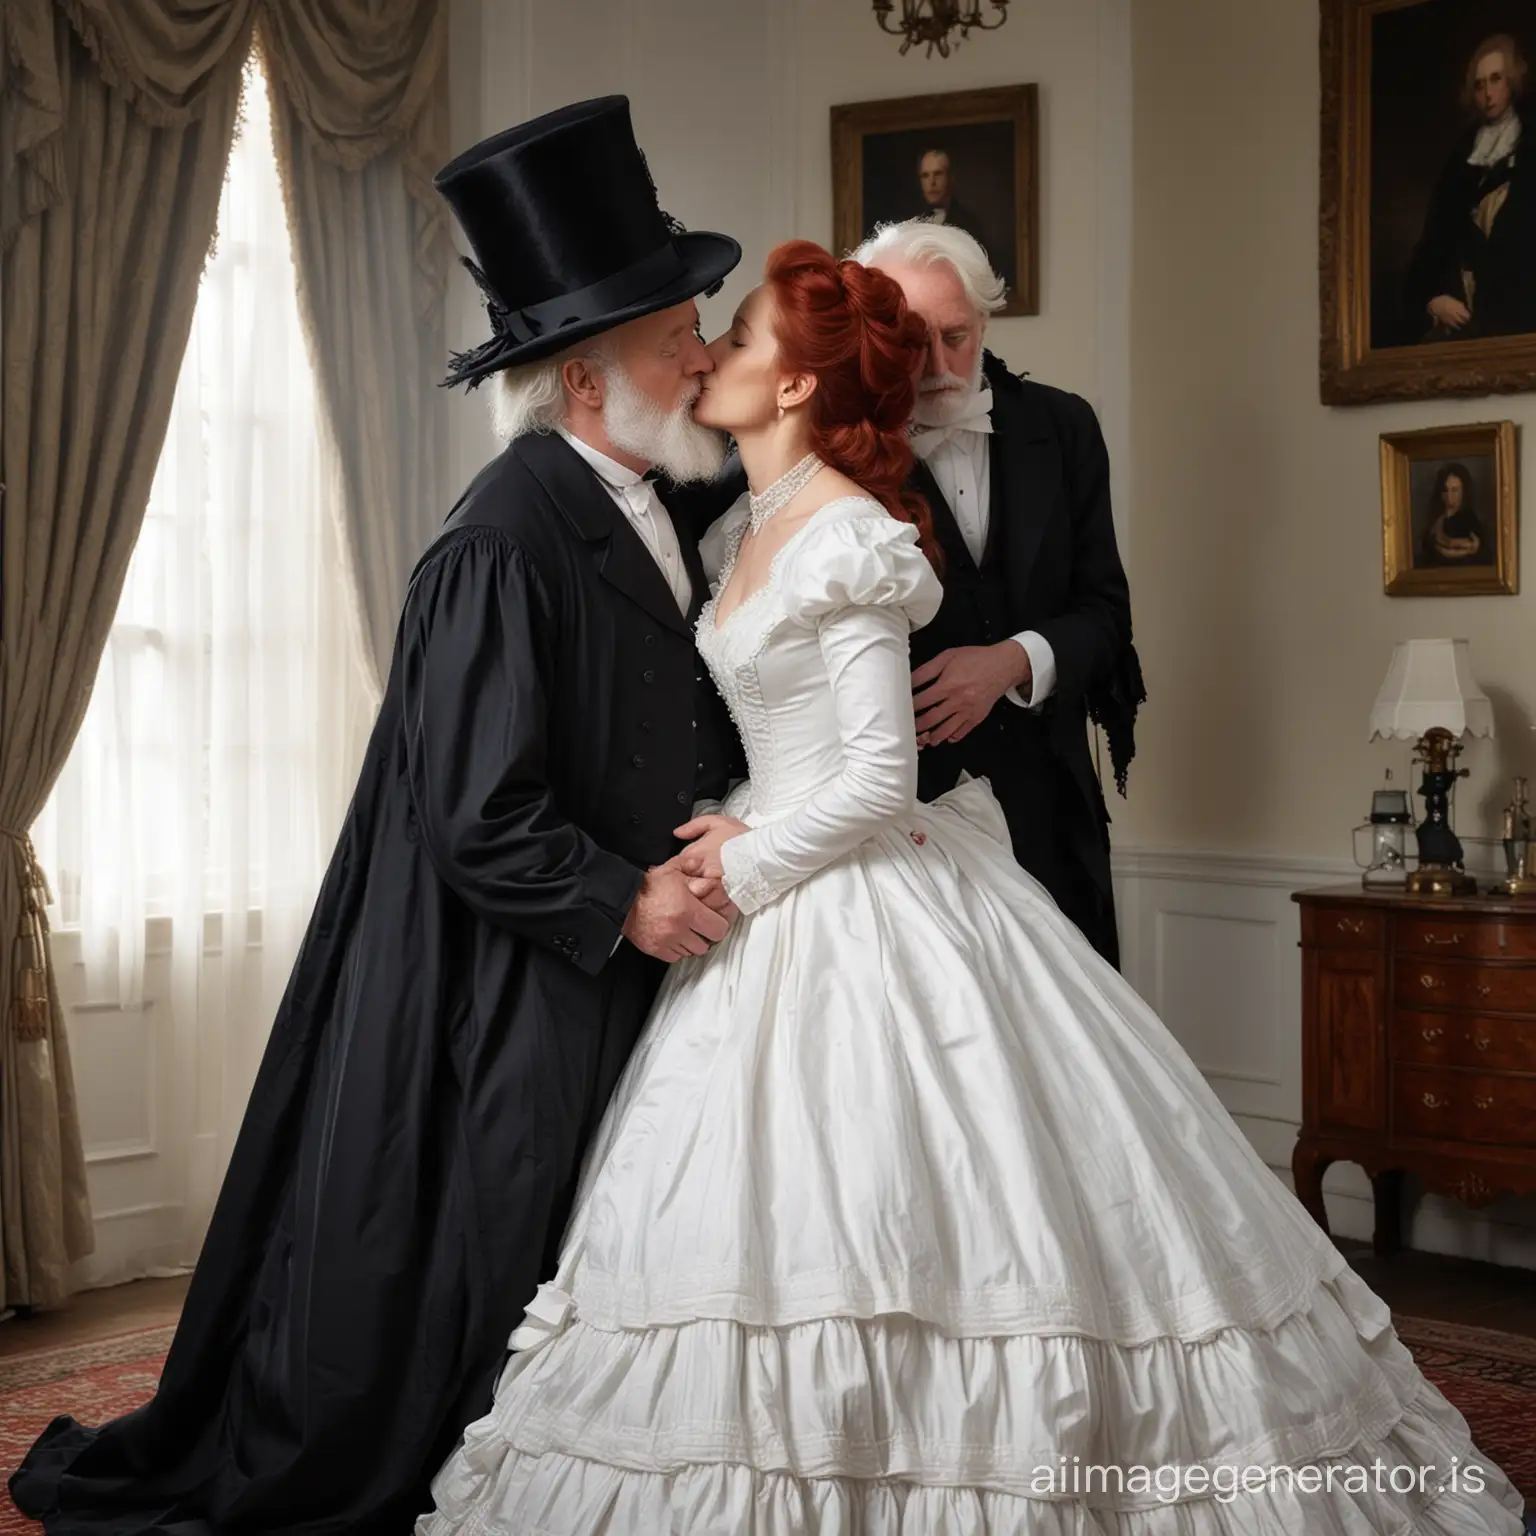 red hair Gillian Anderson wearing a poofy black floor-length loose billowing 1860 Victorian crinoline dress with a frilly bonnet kissing an old man who seems to be her newlywed husband